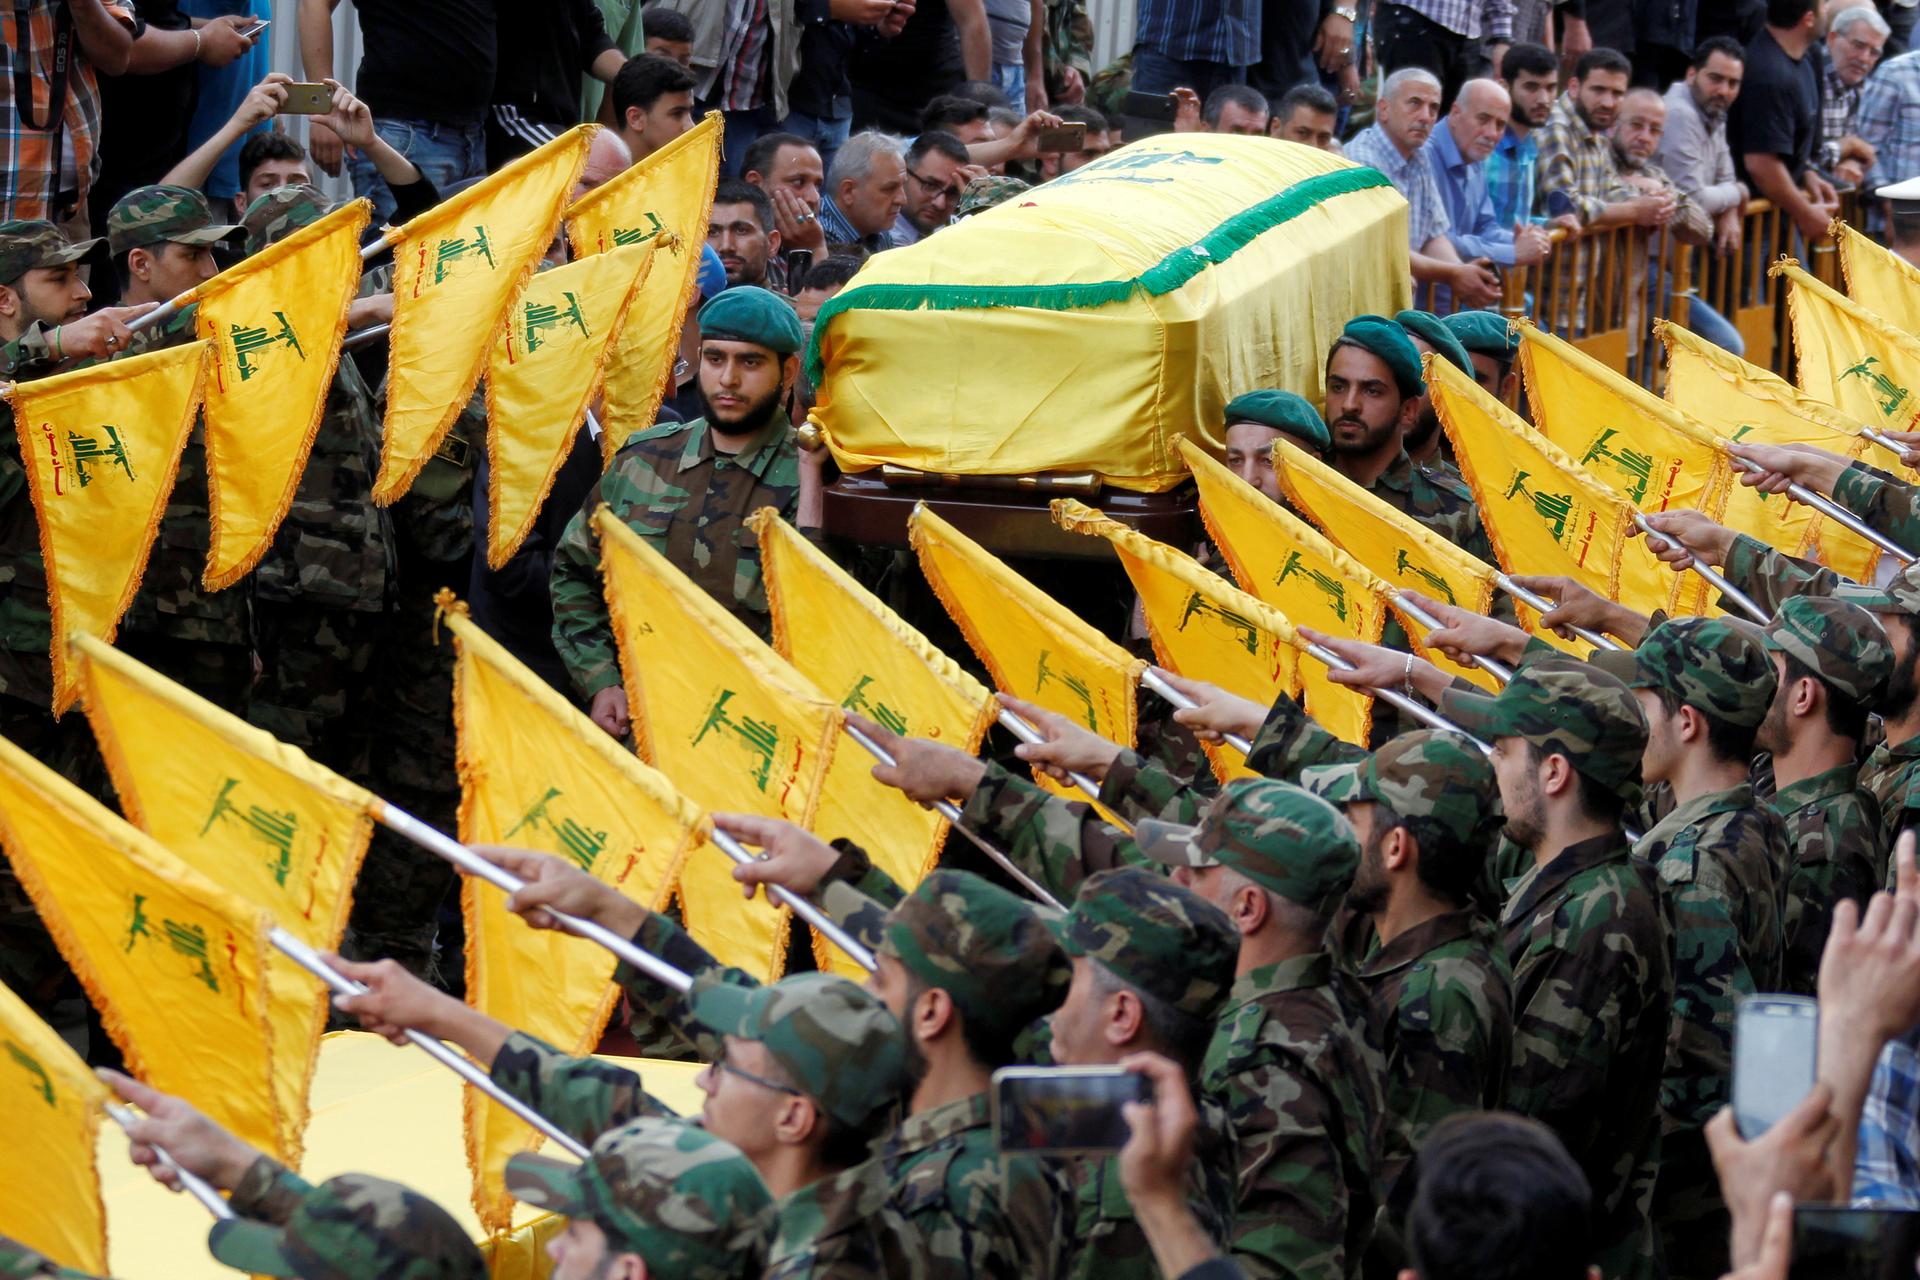 Hezbollah members carry the coffin of top Hezbollah commander Mustafa Badreddine, who was killed in an attack in Syria, during his funeral in Beirut's southern suburbs, Lebanon, May 13, 2016.